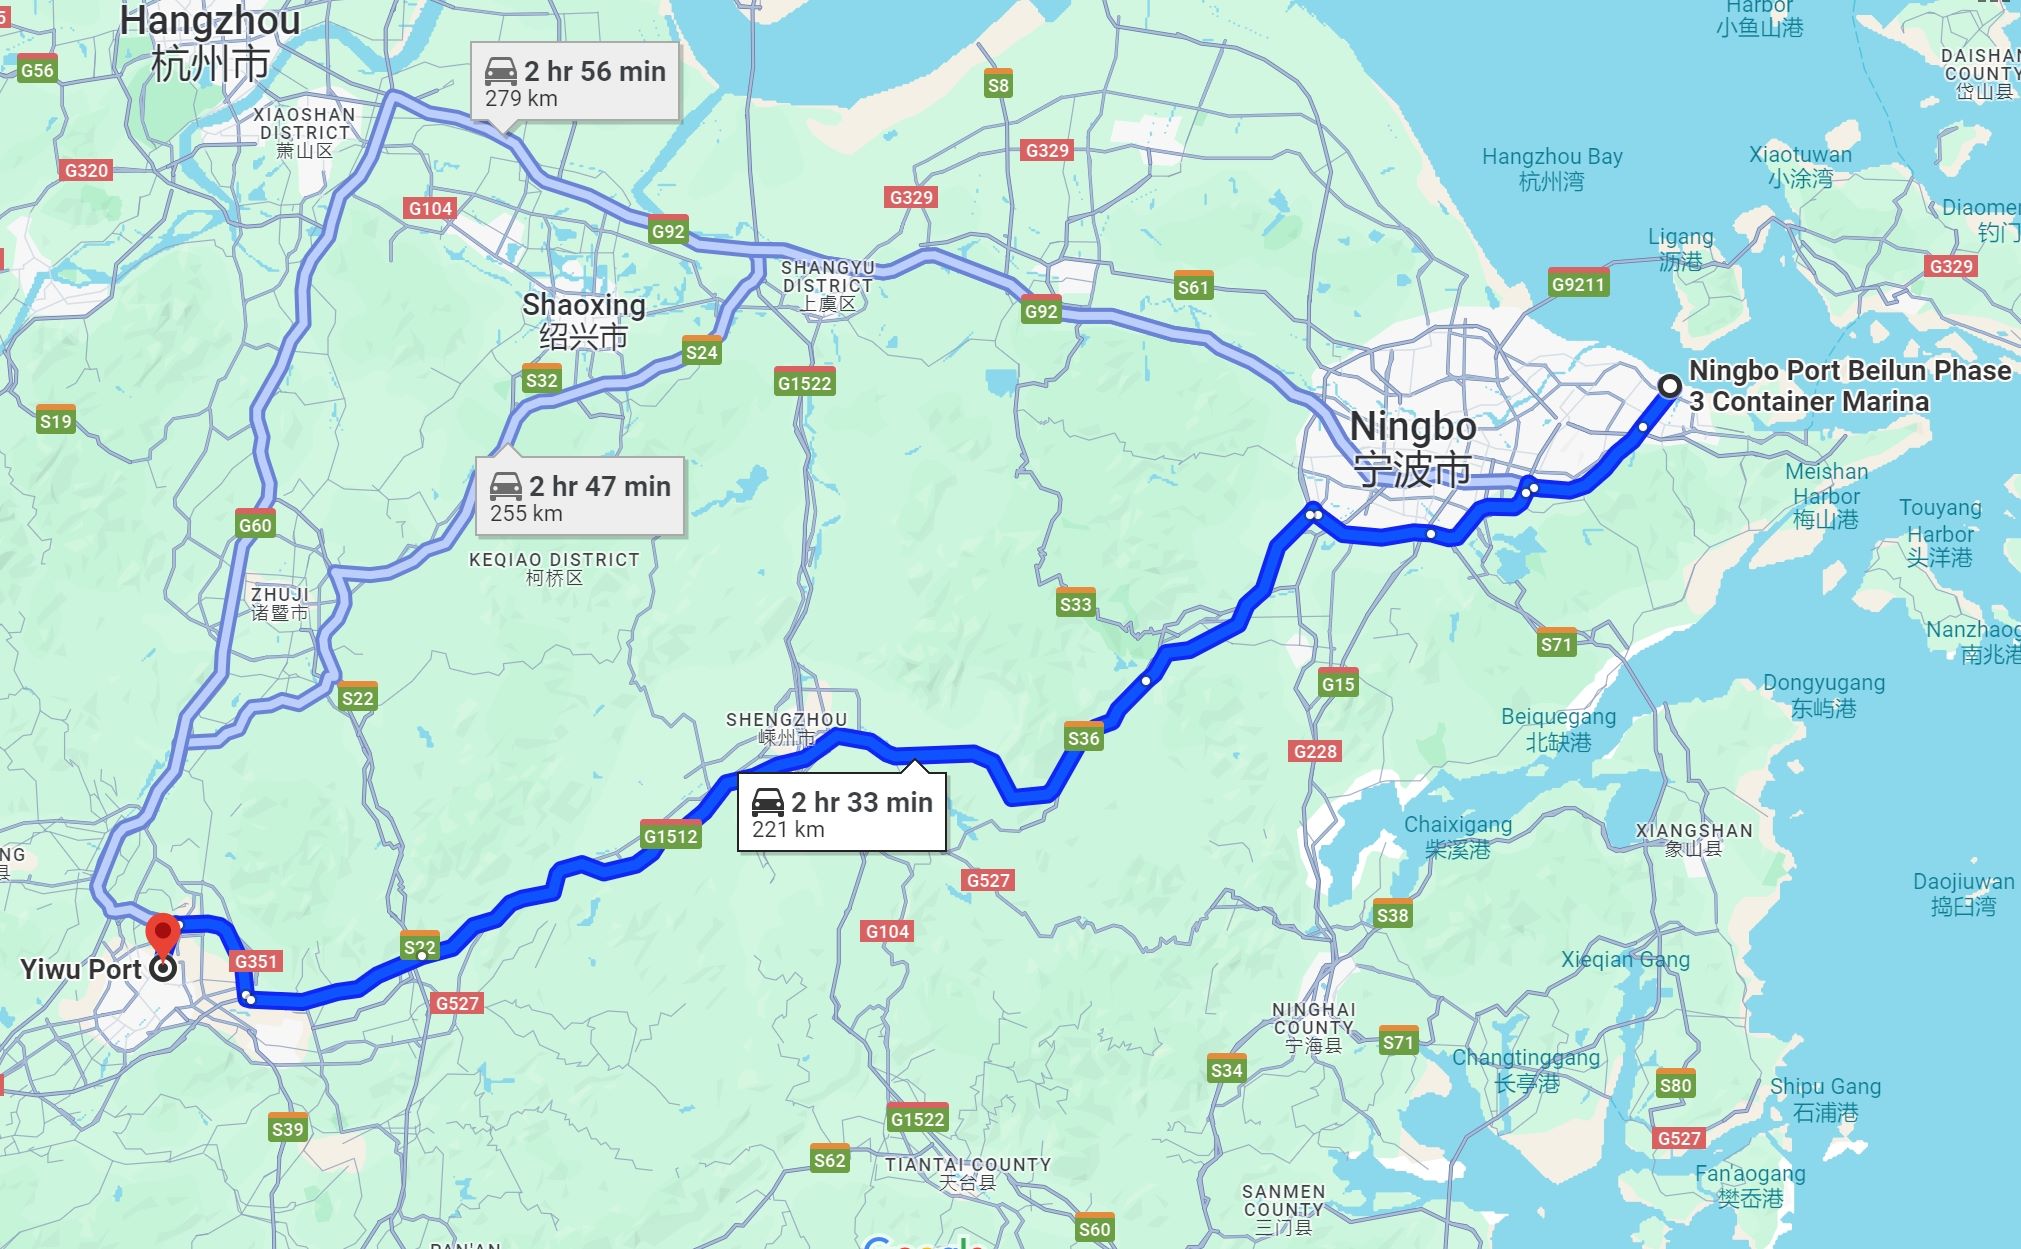 Distance from Yiwu to Ningbo Port